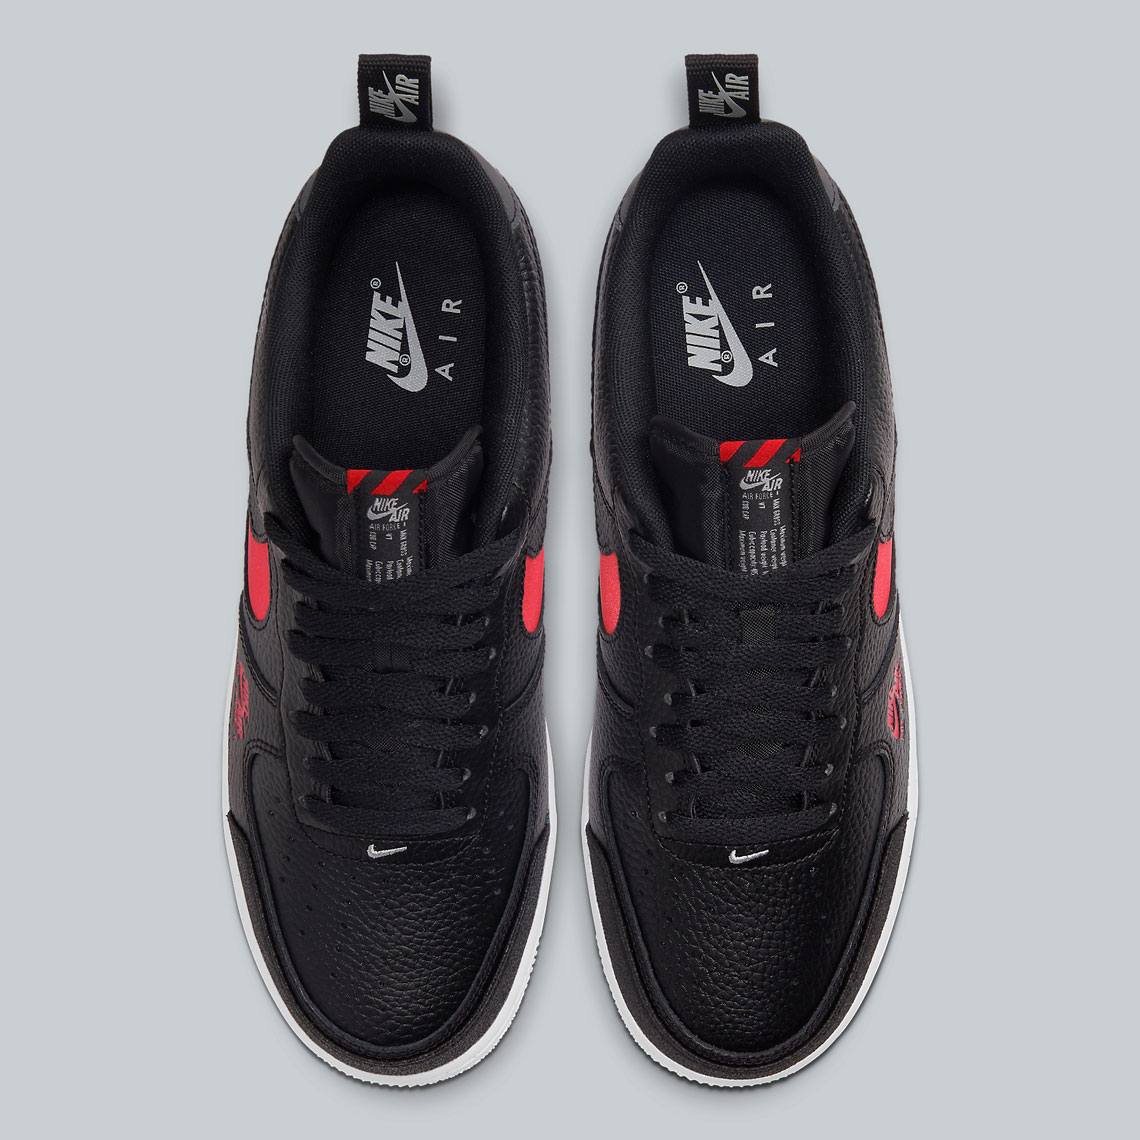 Nike Air Force 1 Low LV8 Utility Black University Red CW7579-001